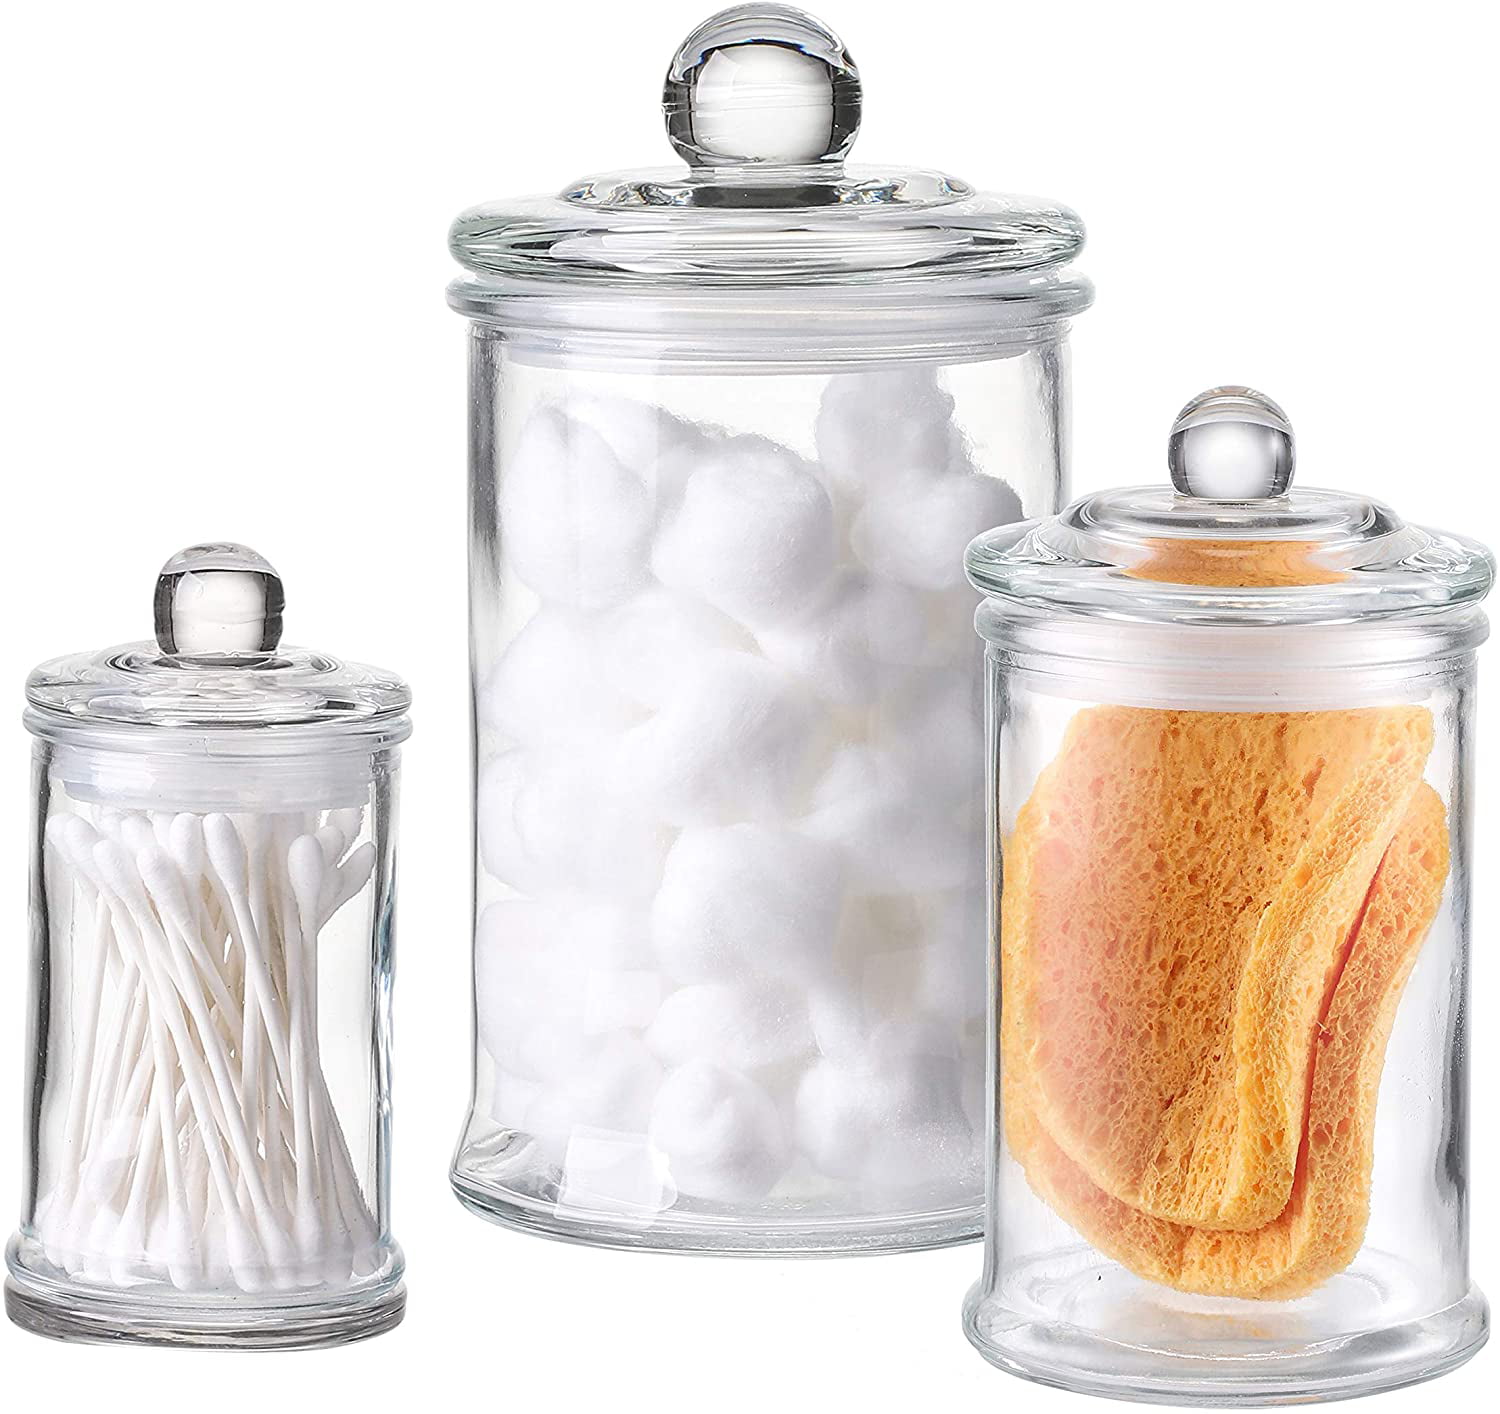 2 Pack Clear/Chrome Details about   mDesign Square Storage Apothecary Jar for Bathroom 